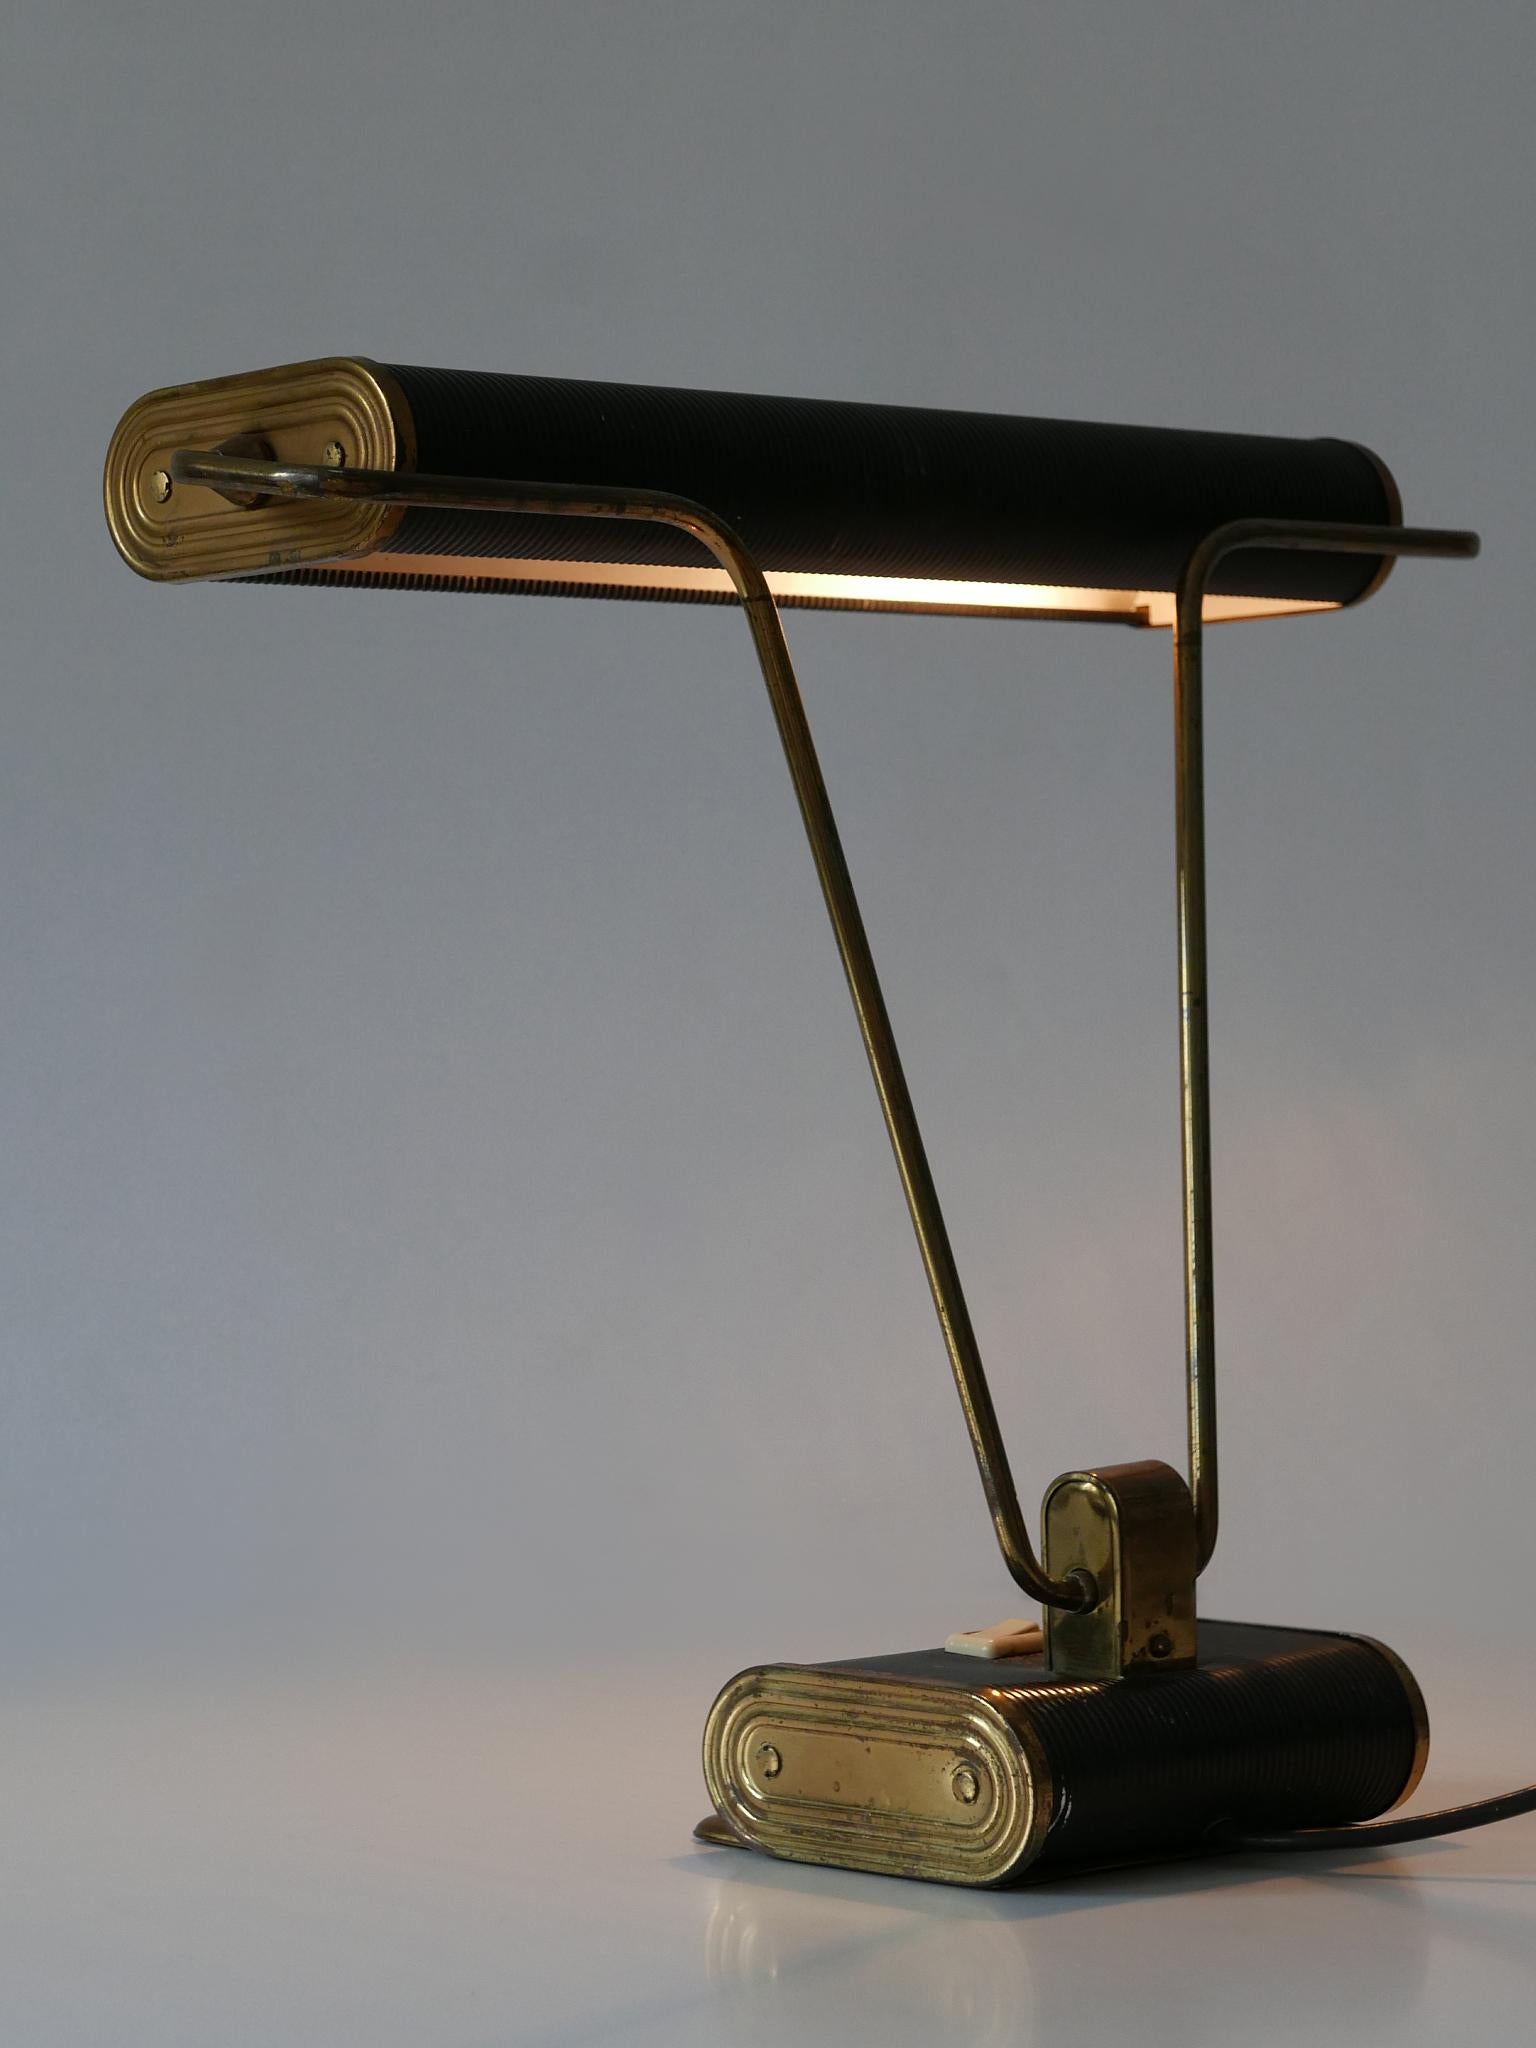 Art Deco Table Lamp or Desk Light 'No 71' by André Mounique for Jumo 1930s For Sale 8